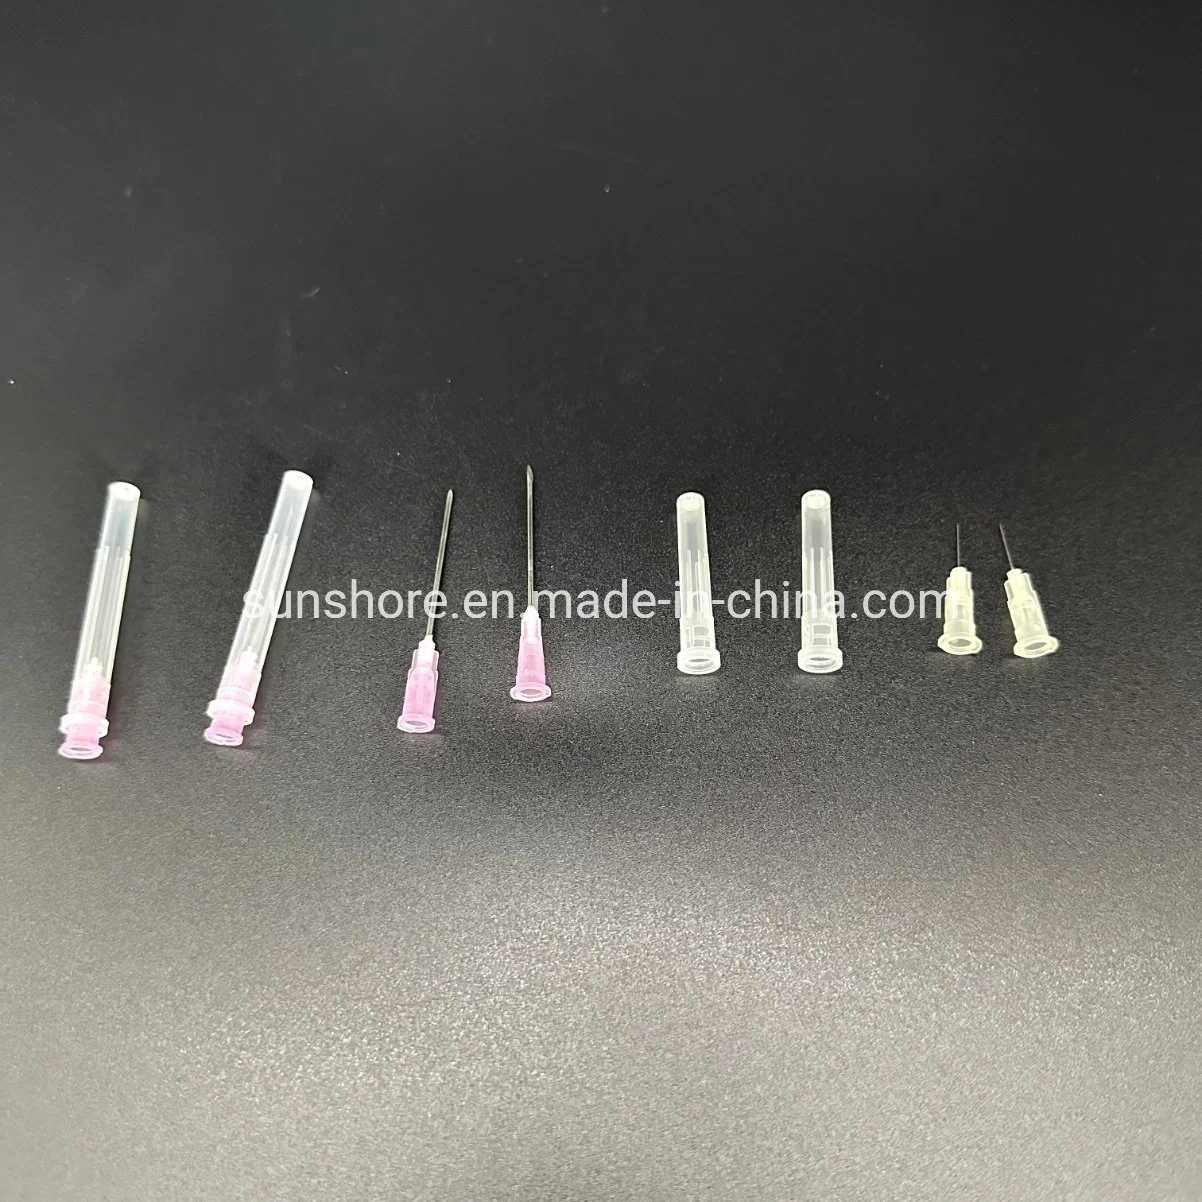 China Products/Suppliers. Injection Medical Disposable Syringe Hypodermic Needle